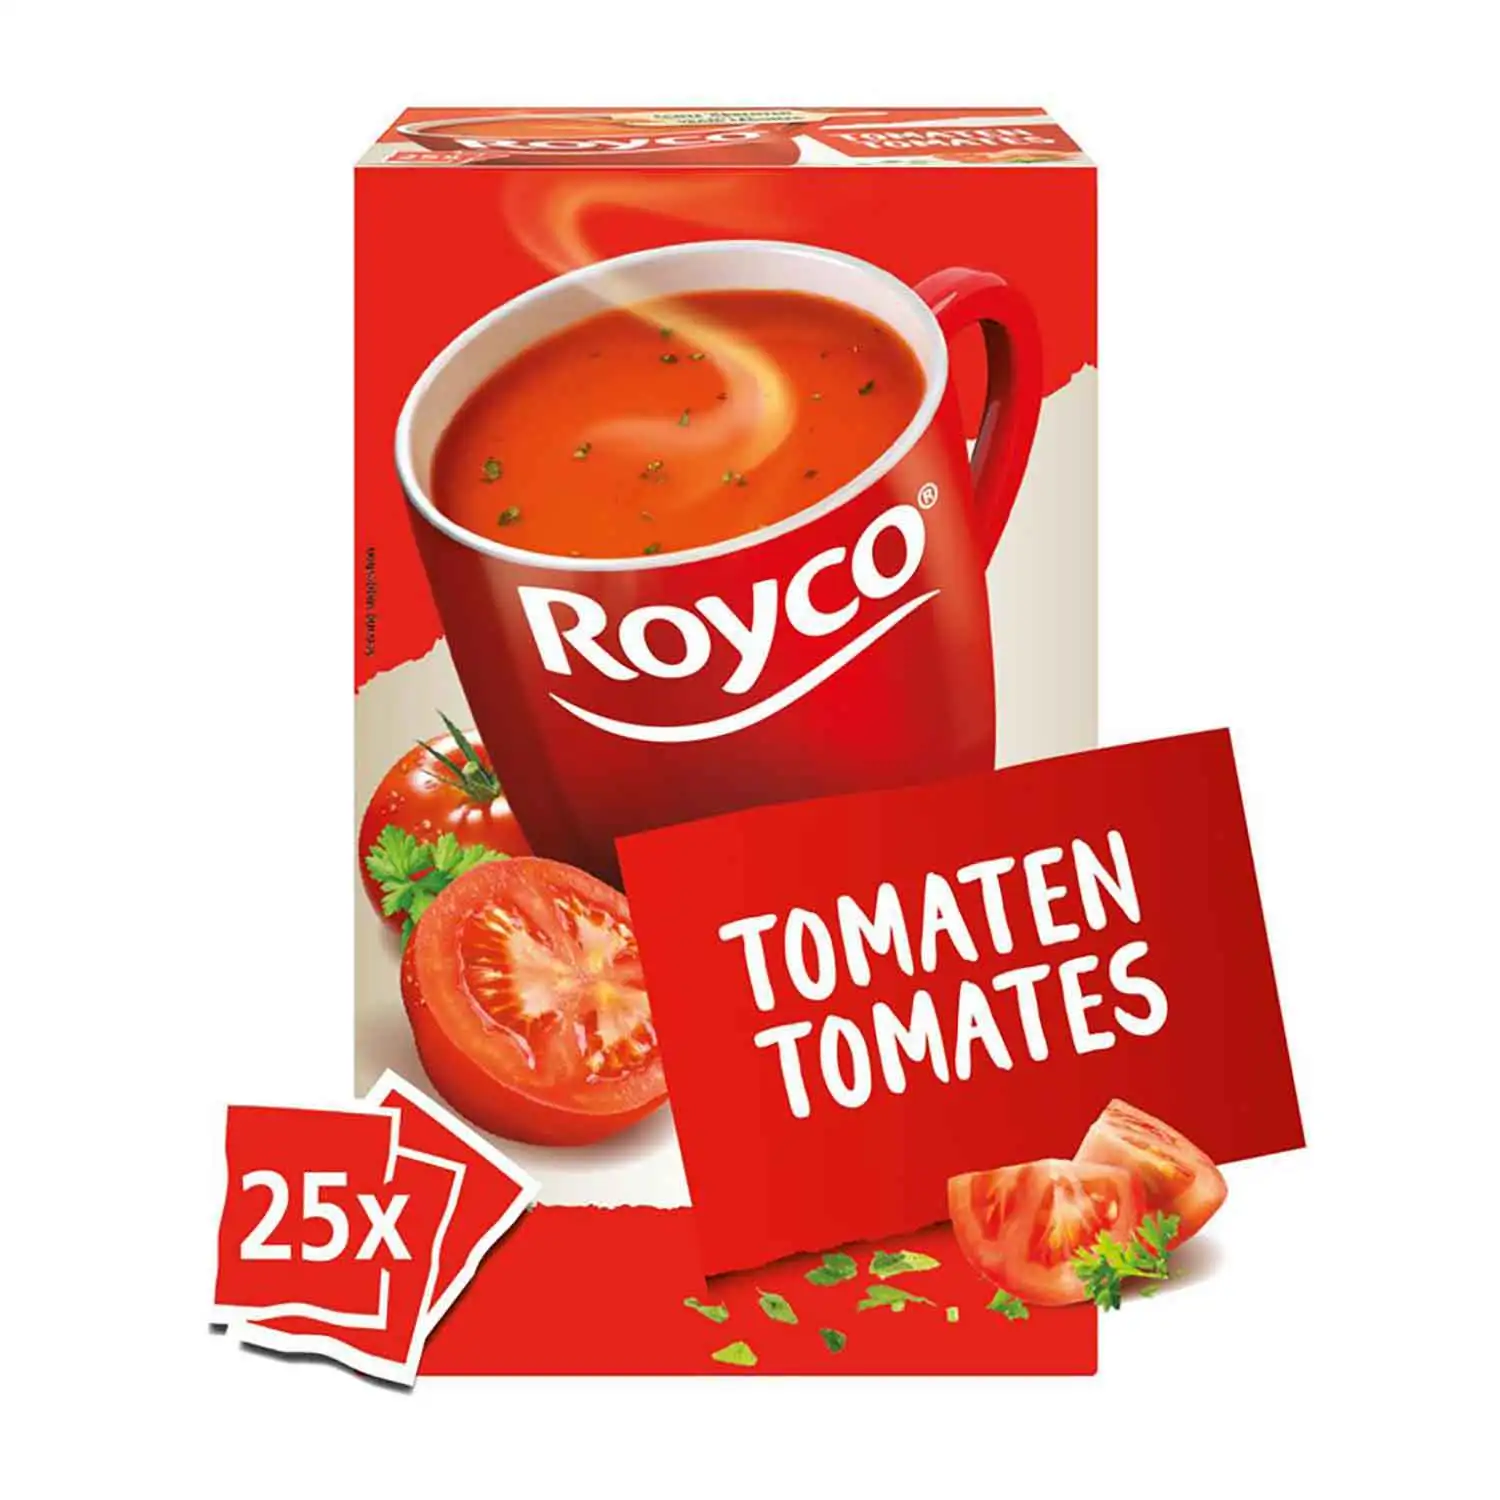 25x Royco classic tomatoes 17g - Buy at Real Tobacco